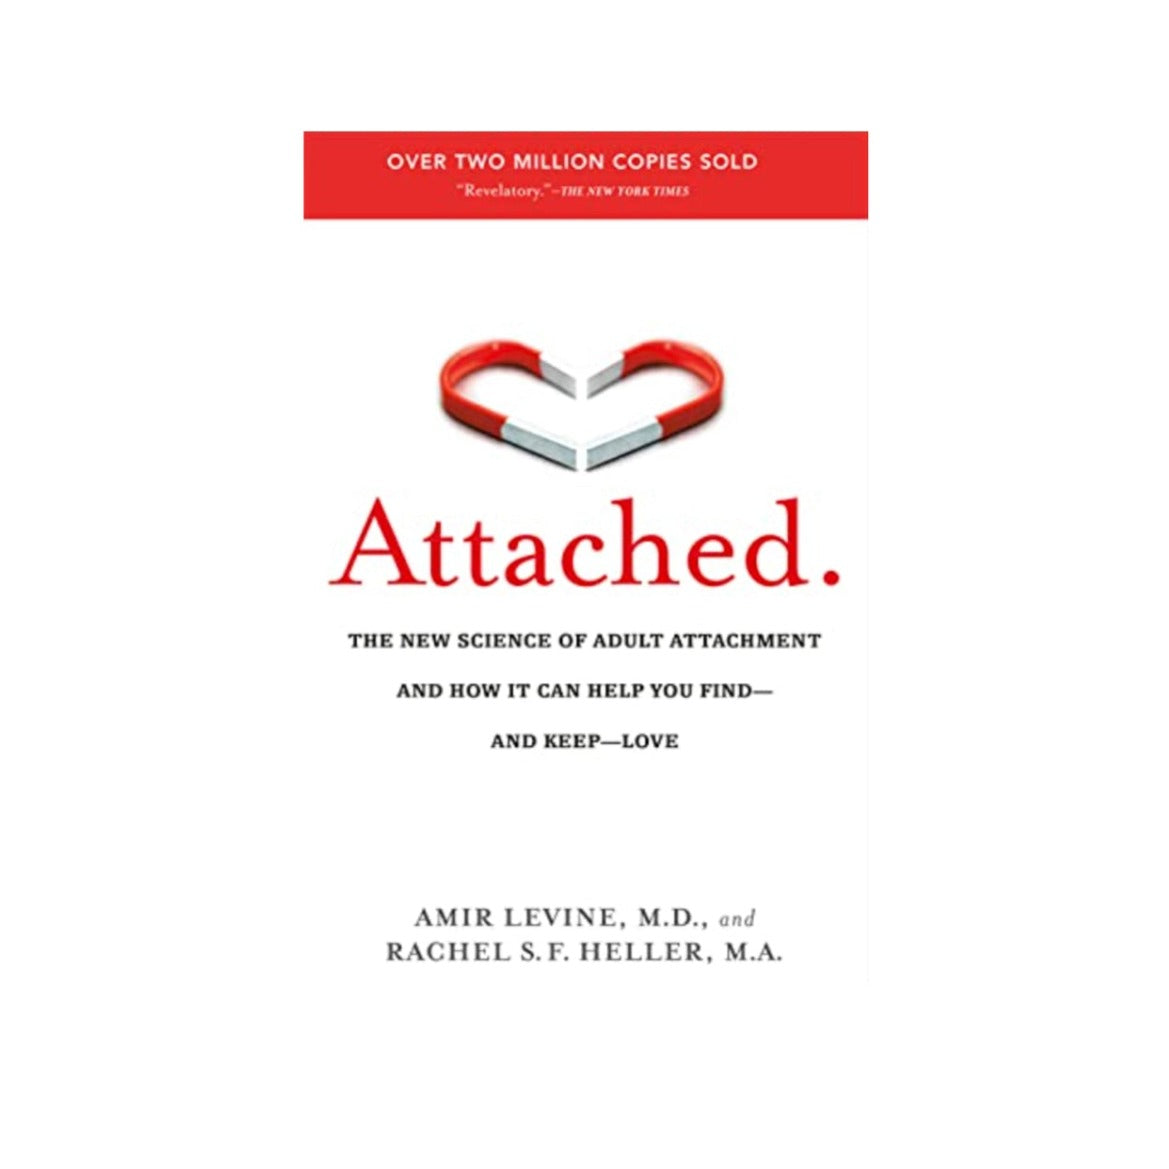 Attached by Amir Levine & Rachel S.F. Heller